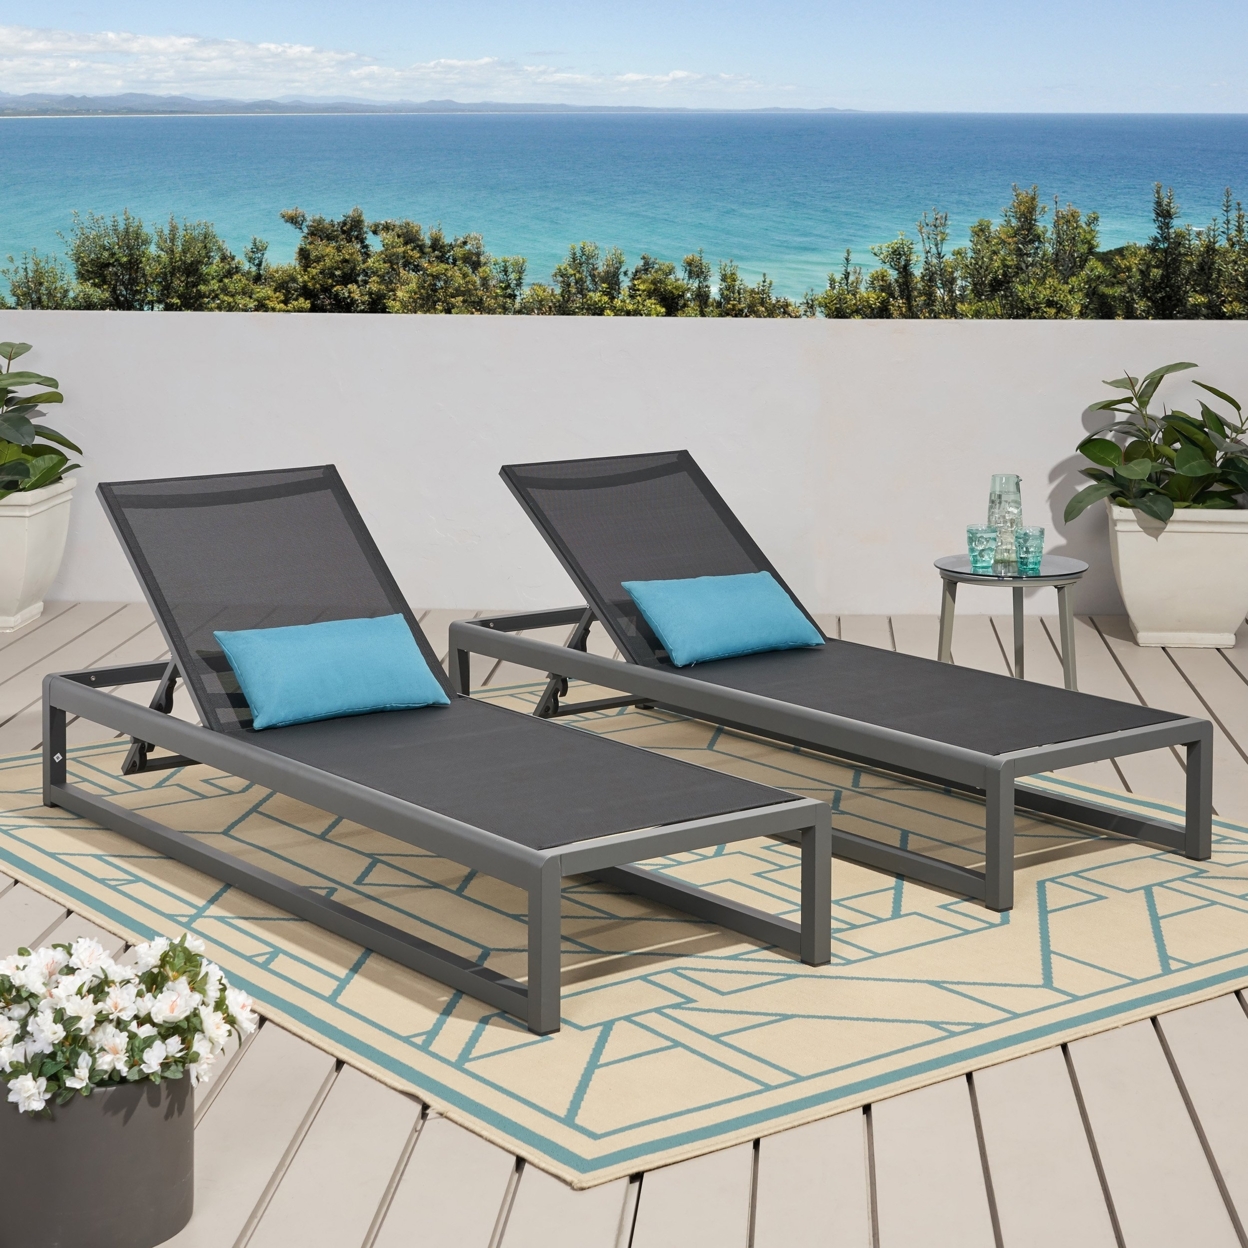 Camdyn Outdoor Mesh Chaise Lounge (Set Of 2) - Black/gray